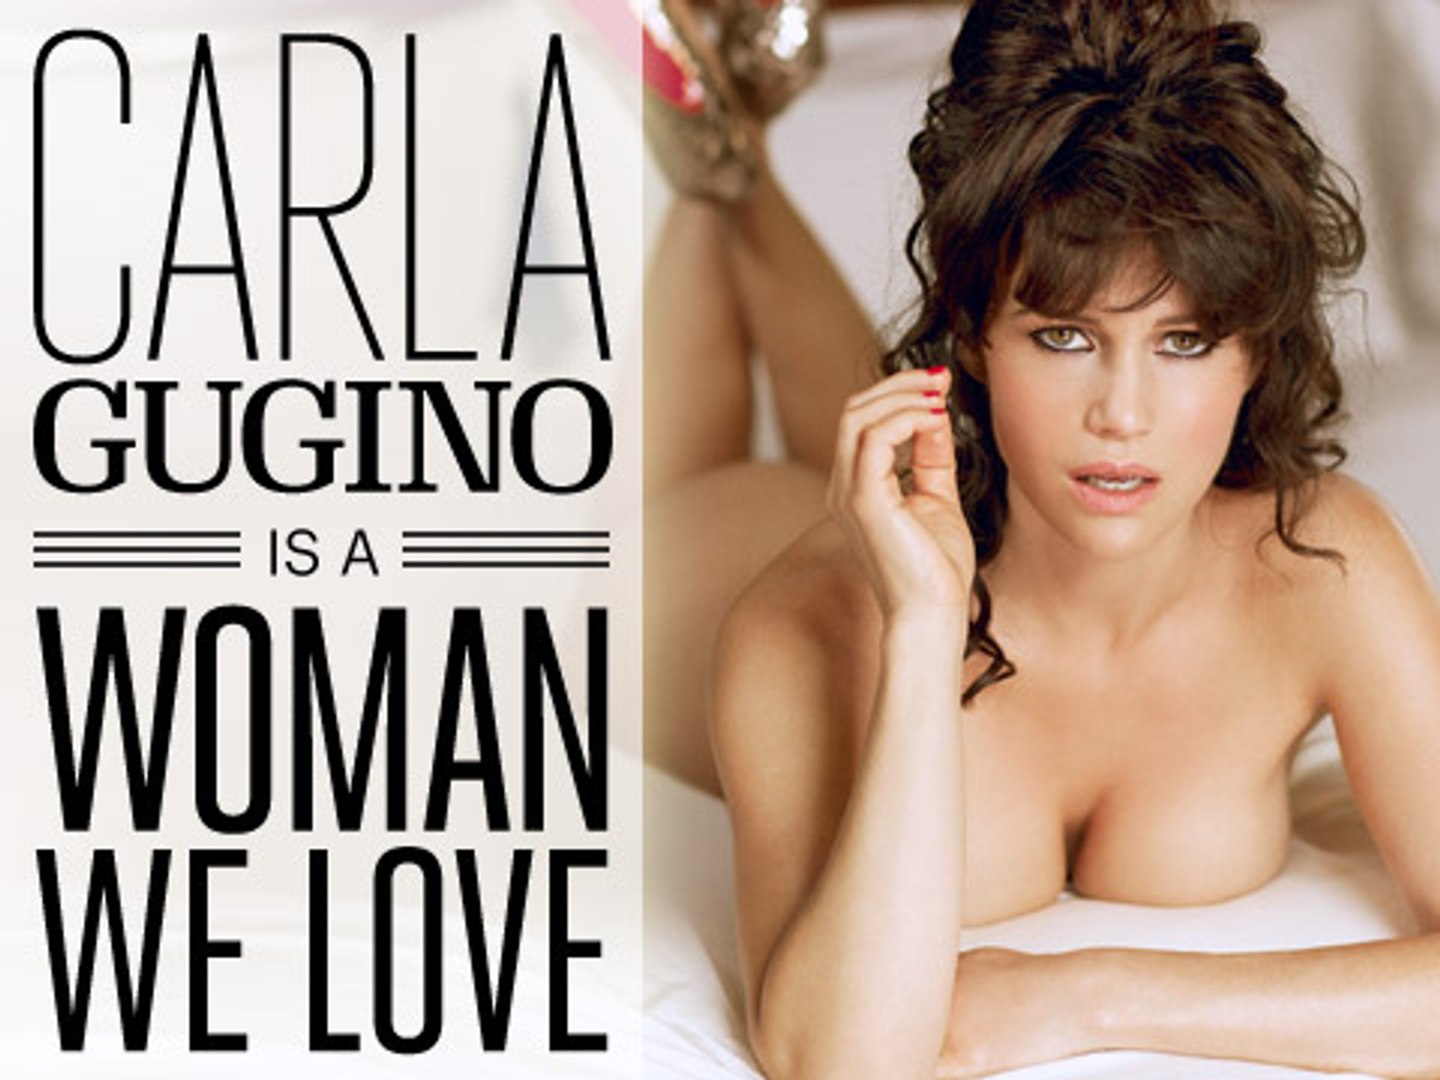 Carla Gugino Is a Woman We Love - video Dailymotion